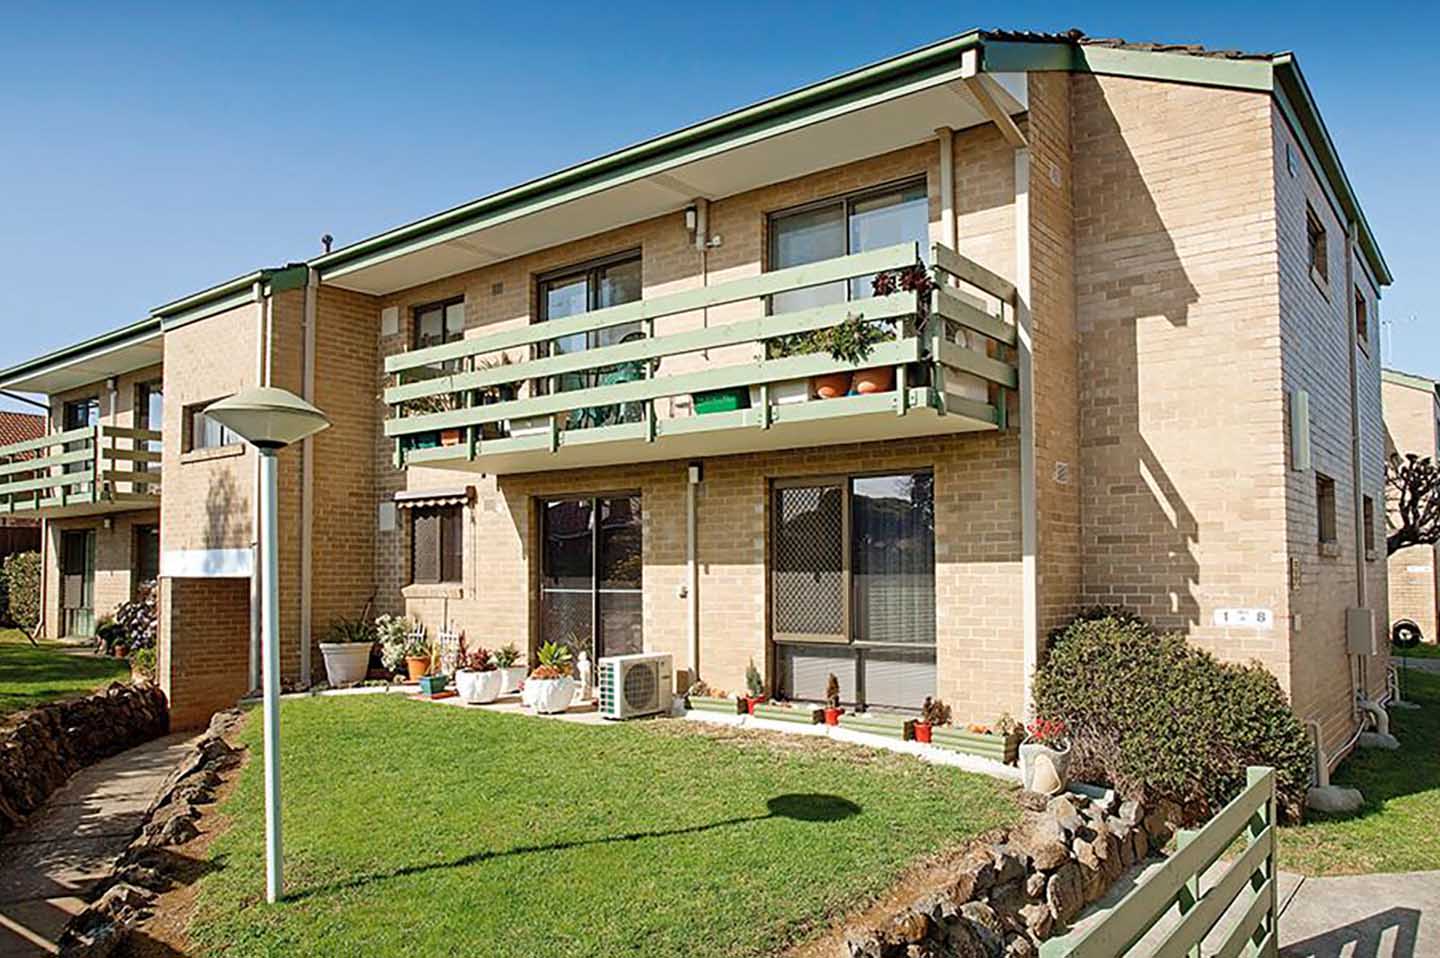 An apartment building with a balcony and a lawn, designed for retirement living.